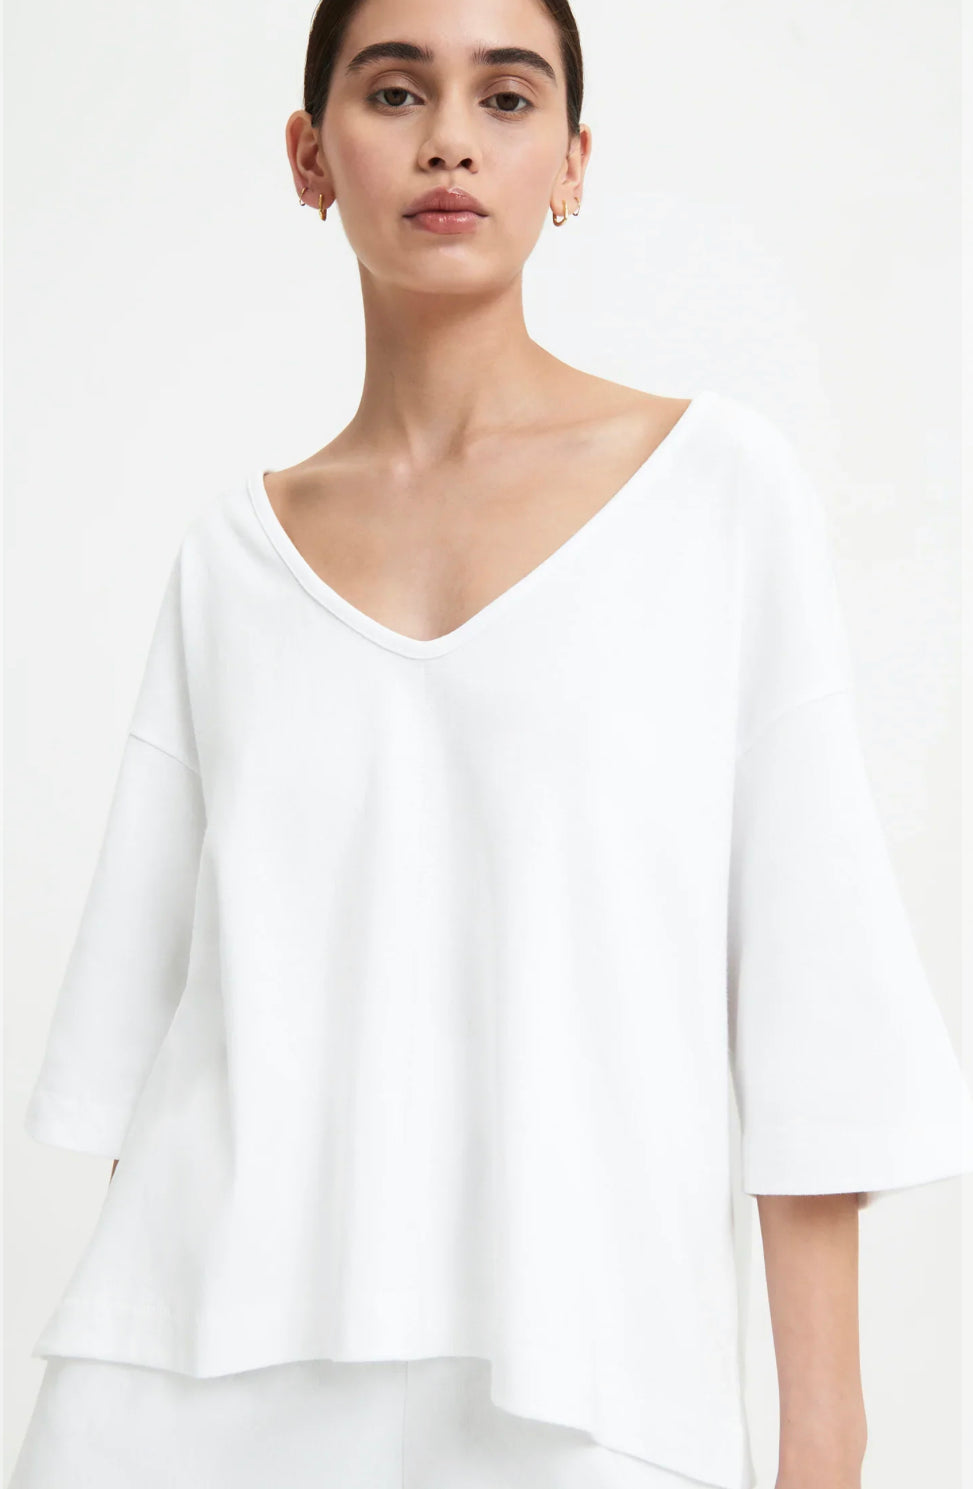 Nude Lucy Fes Top - White